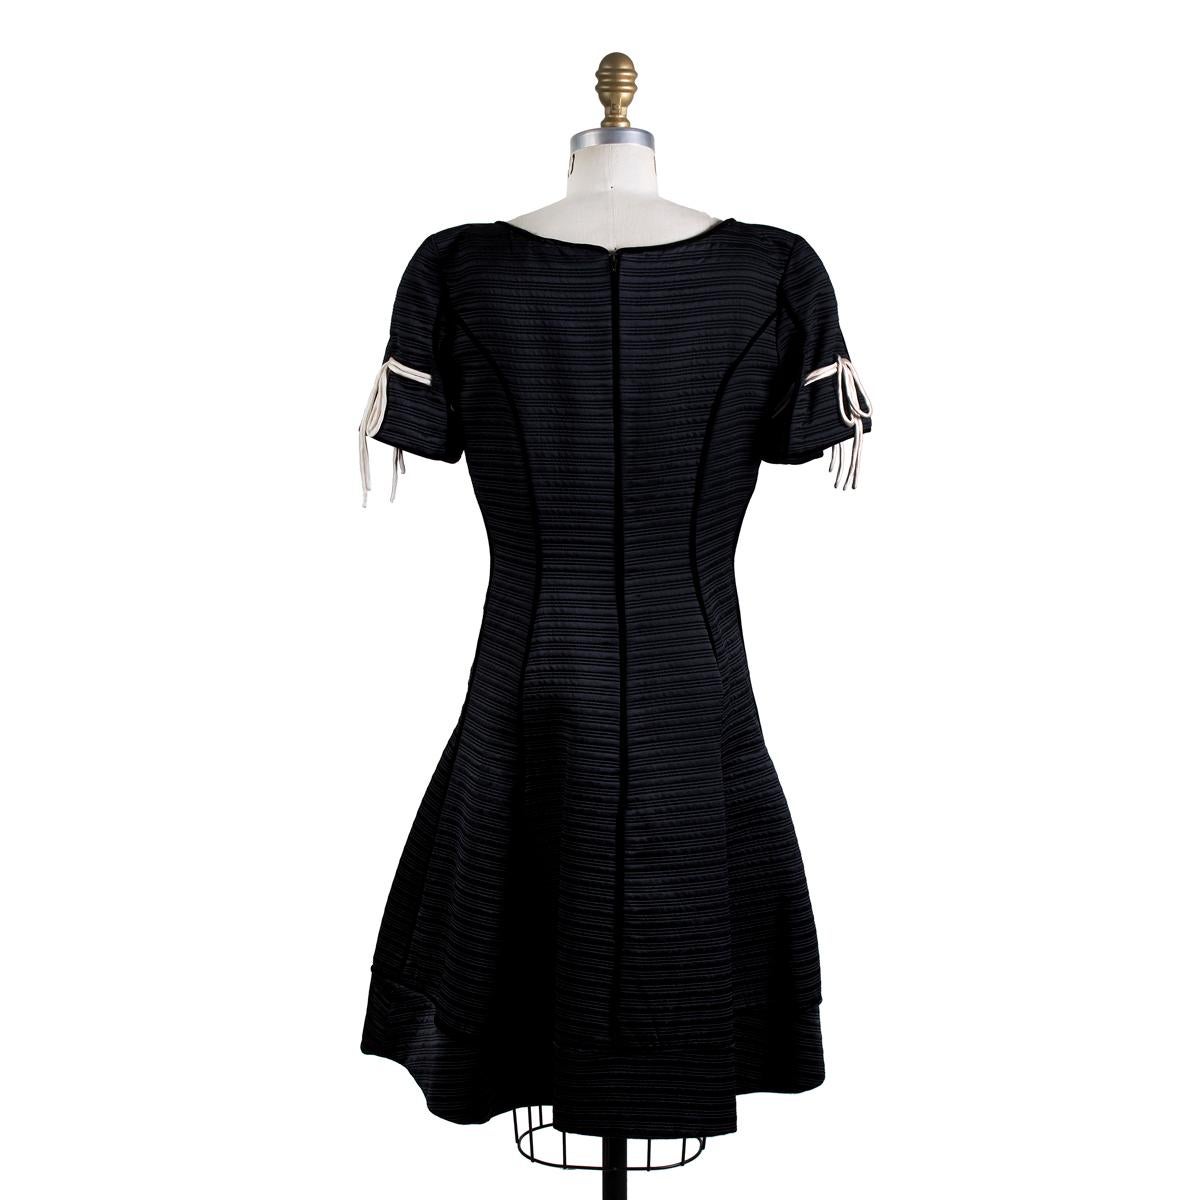 Vintage dress from Valentino
Horizontal quilting on heavy black silk
White silk string ties around sleeves
Flared skirt
Back zipper closure
Condition: Excellent vintage condition
Size/Measurements:
Size 6
36